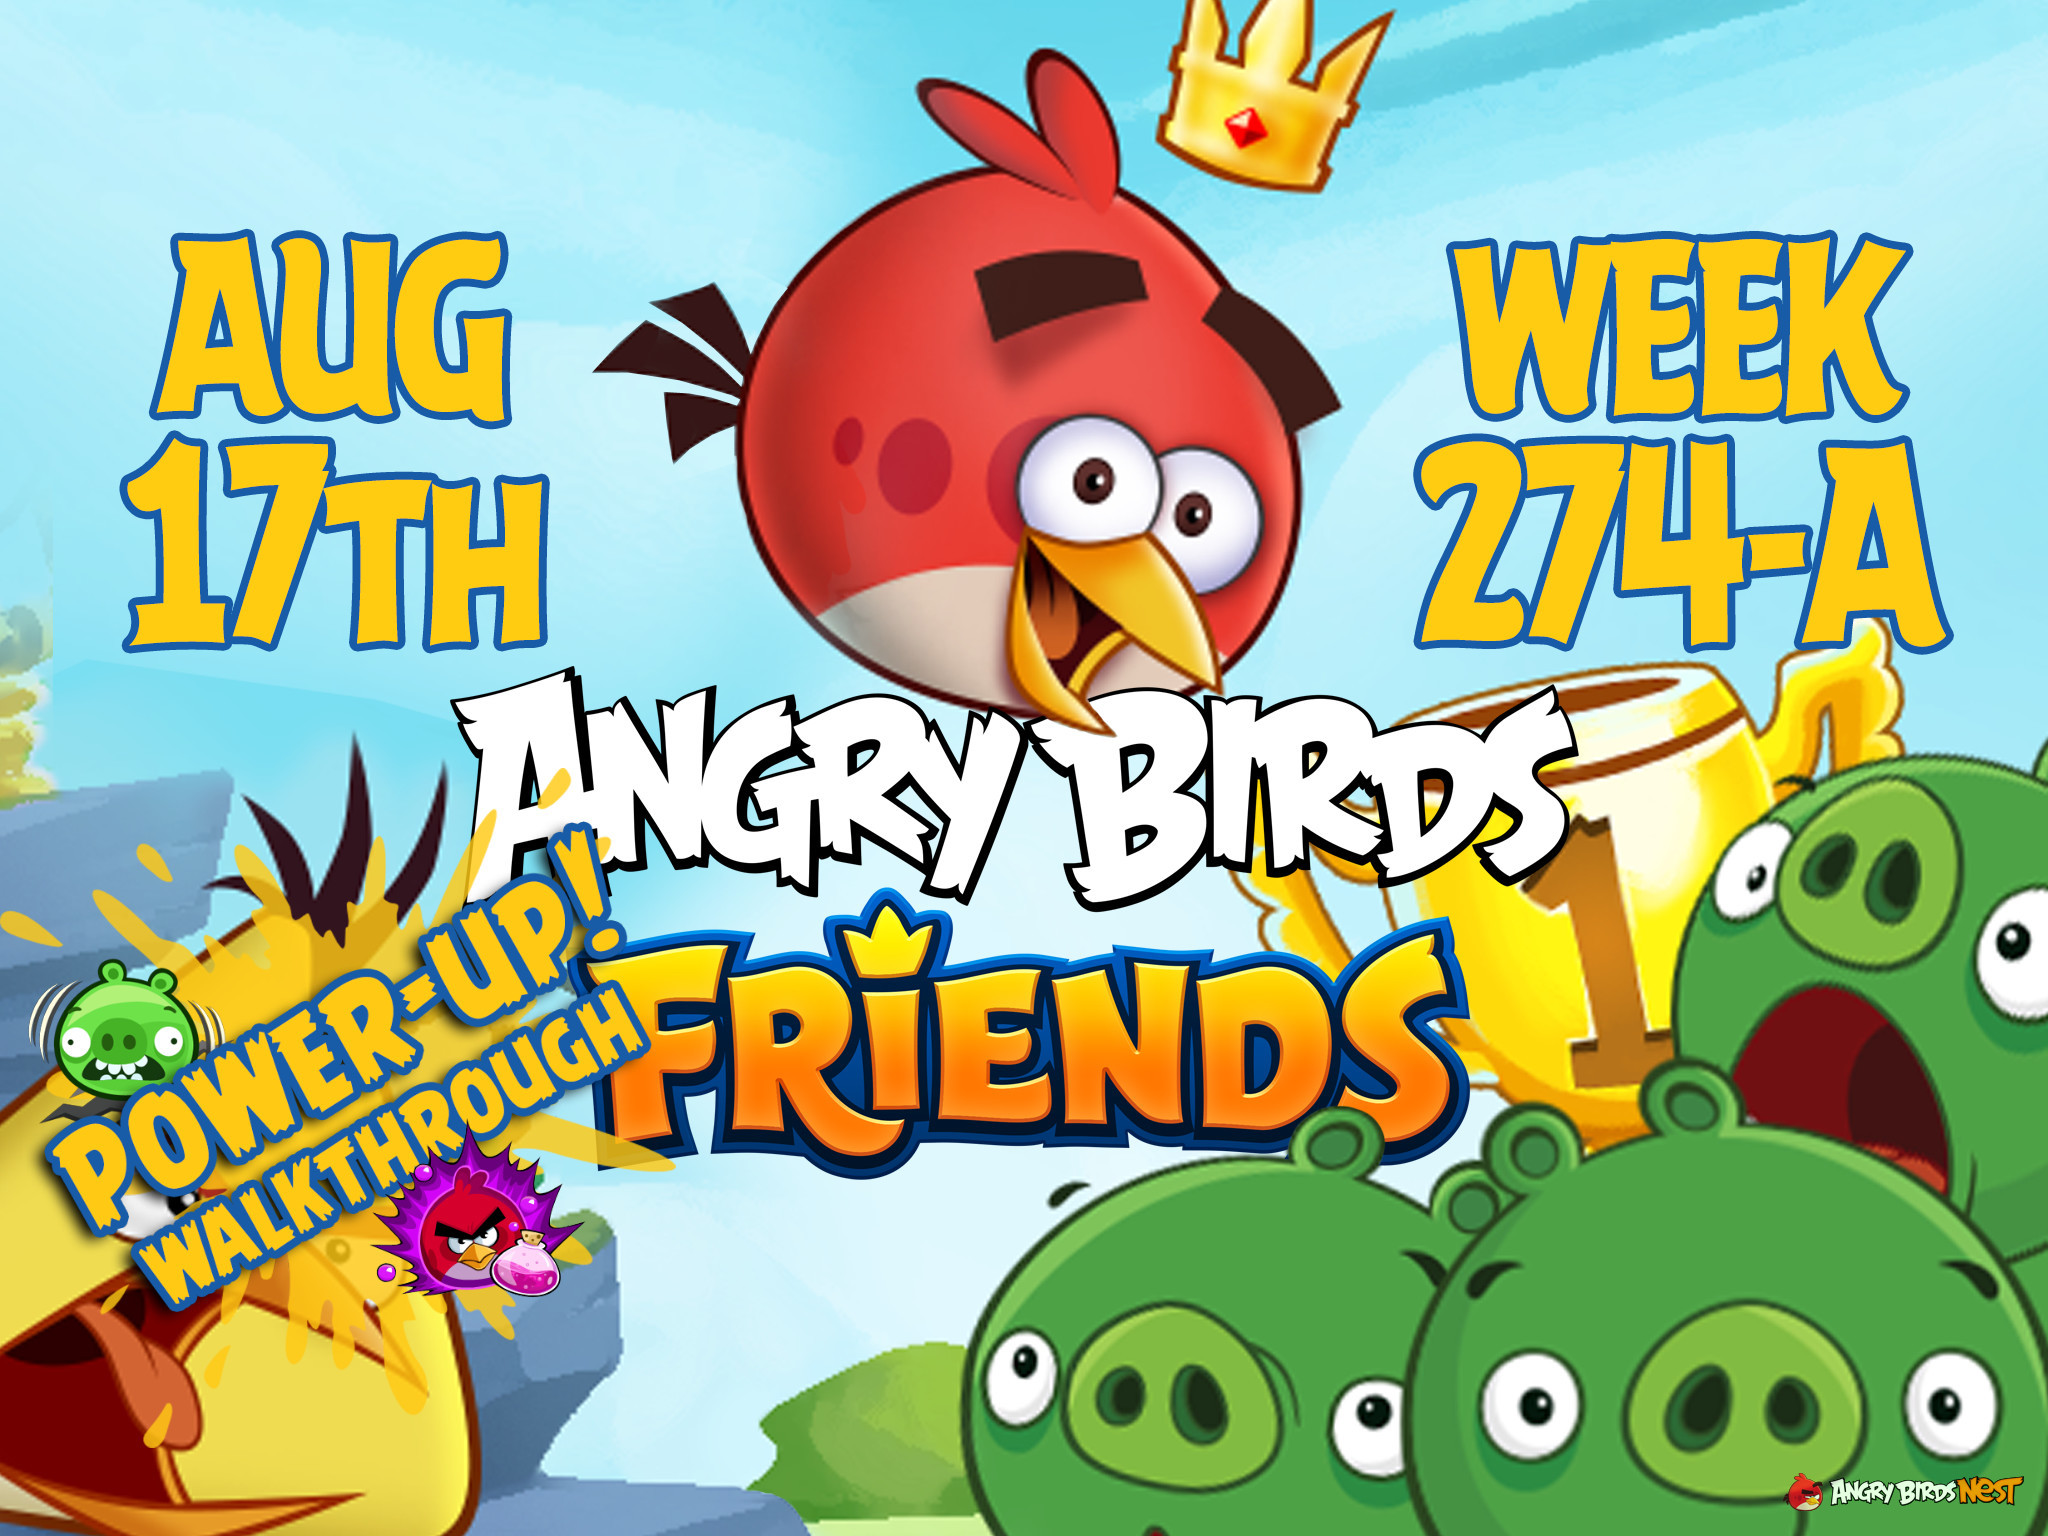 Angry Birds Friends Tournament Week 274-A Feature Image PU